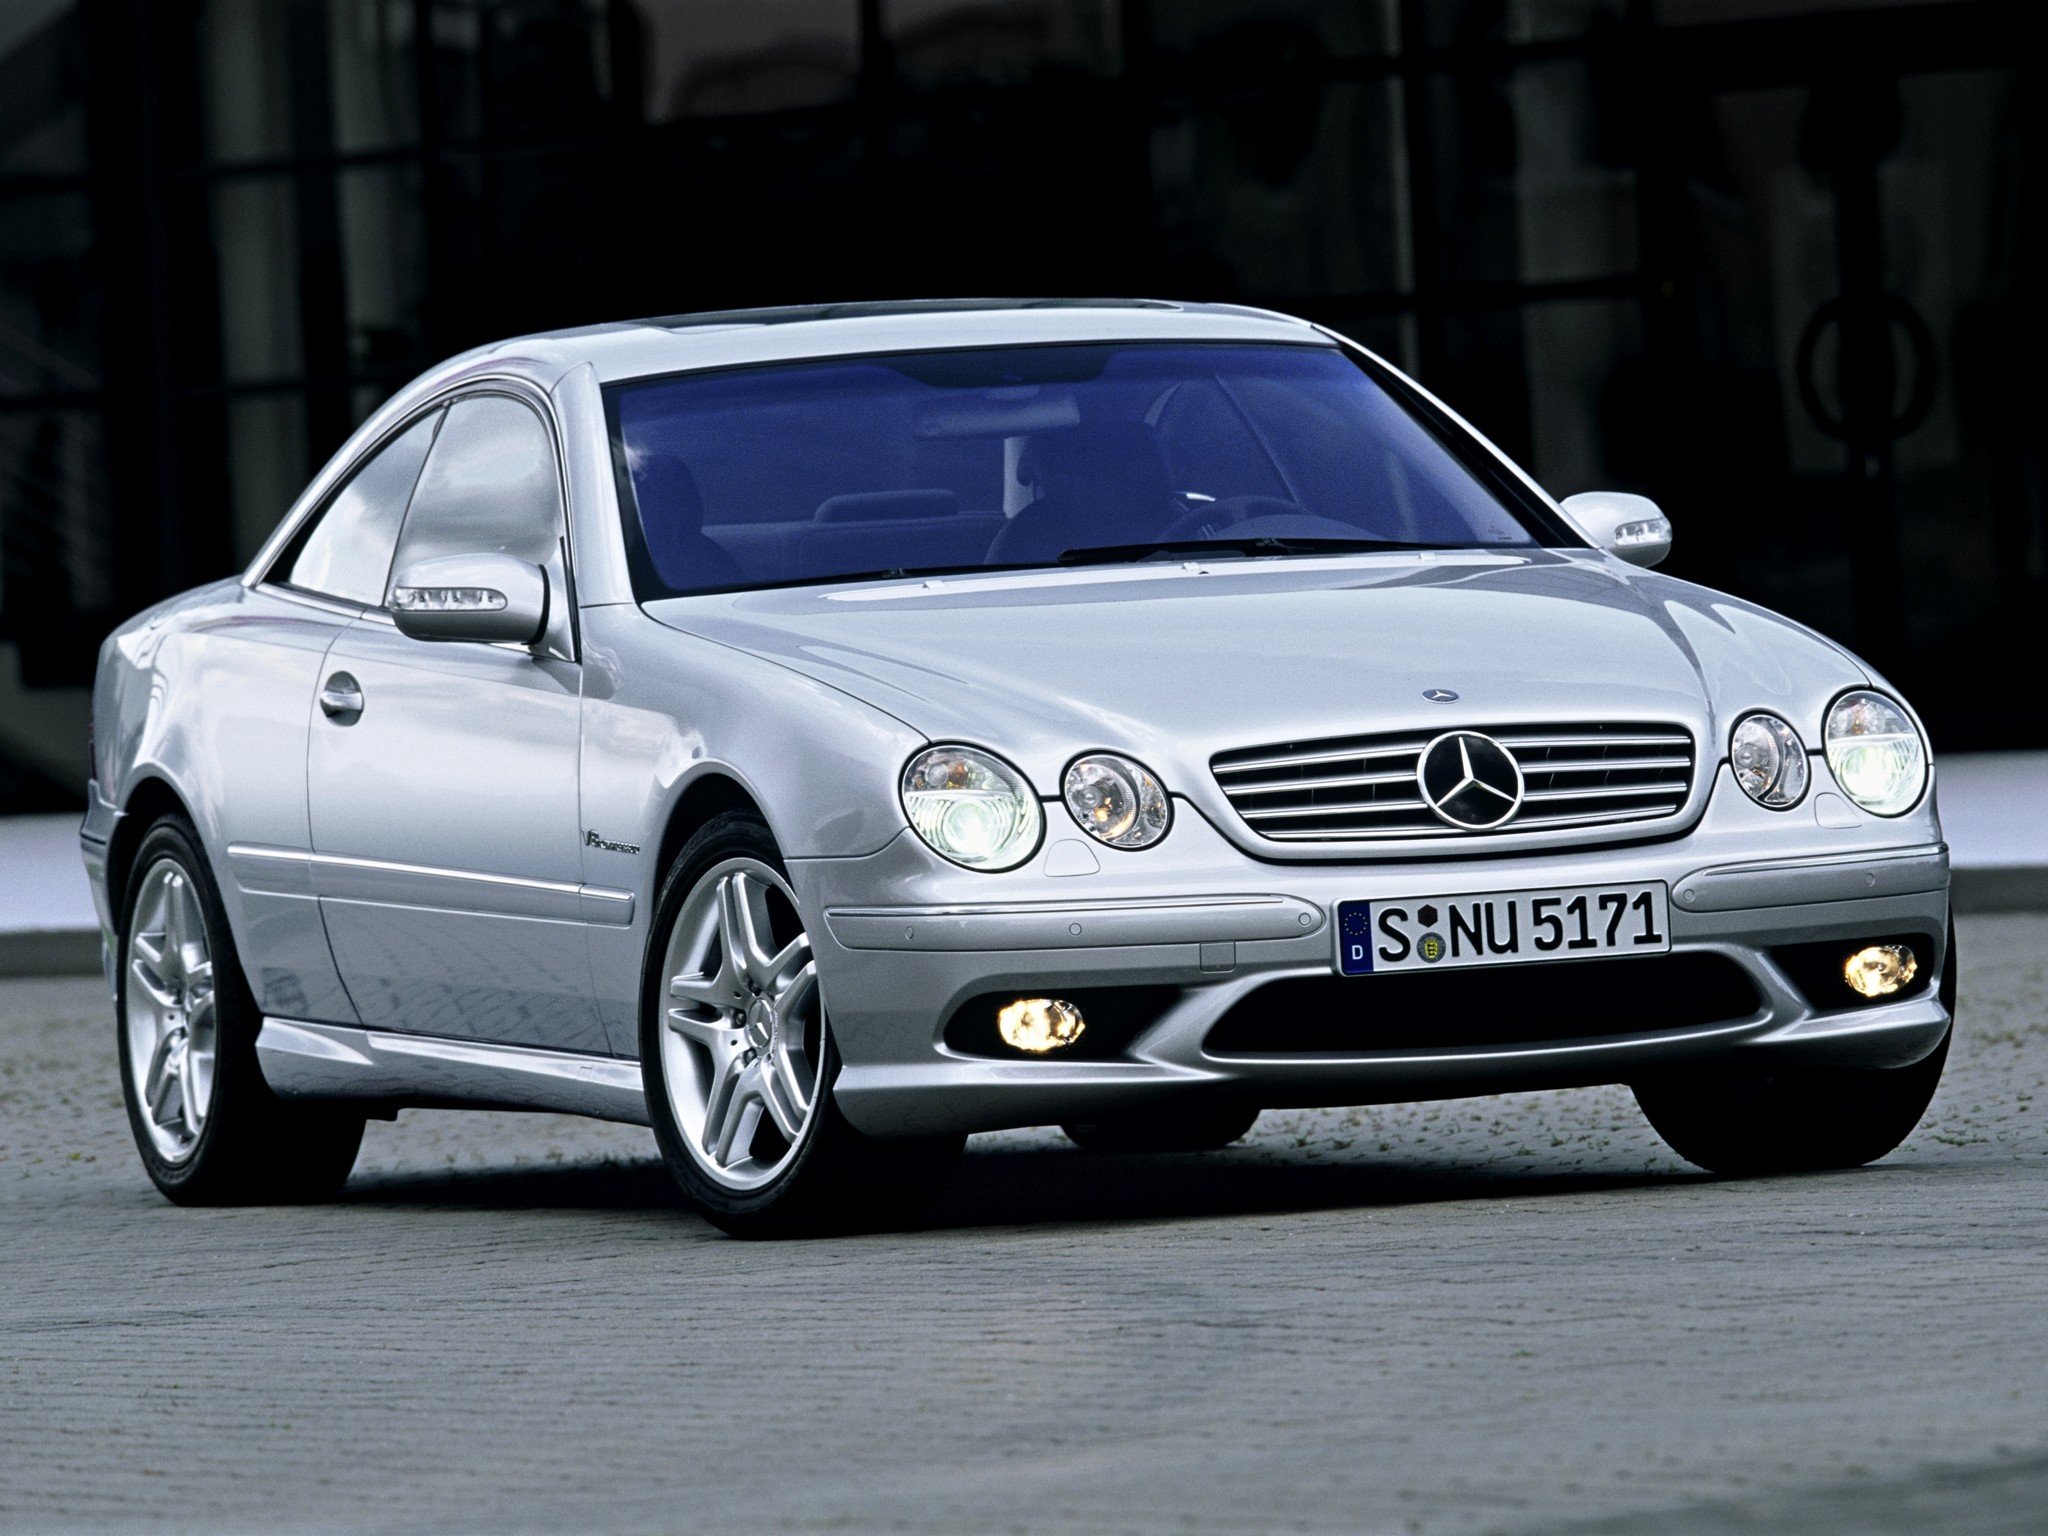 mercedes, Benz, Cl, 55, Amg, C215, 20, 02coupe, Cars Wallpaper